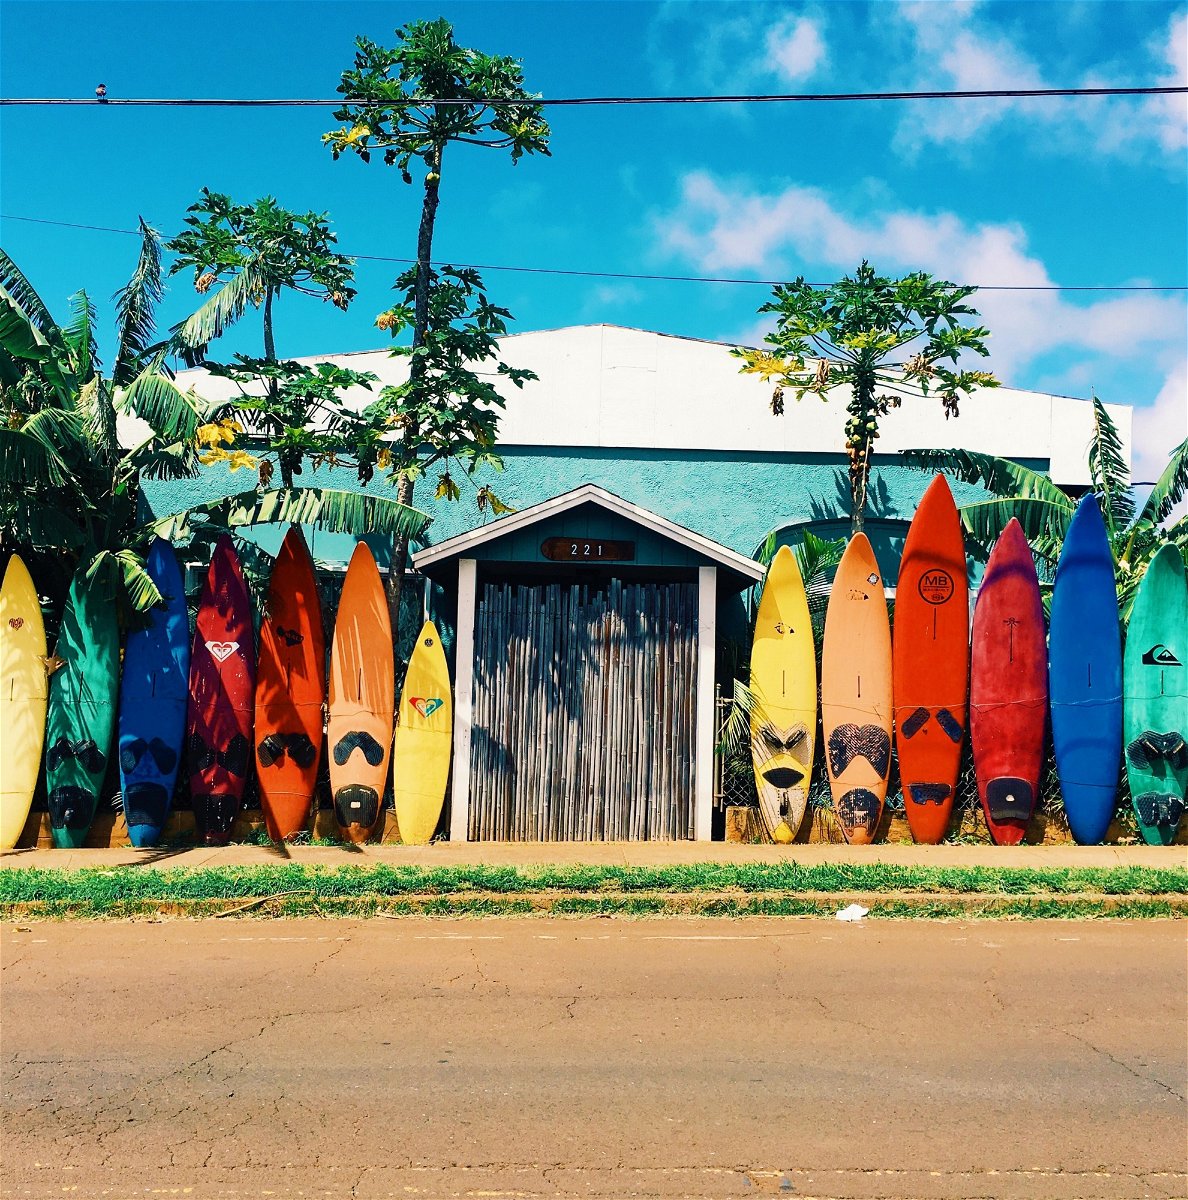 Colourful surf boards in Hawaii